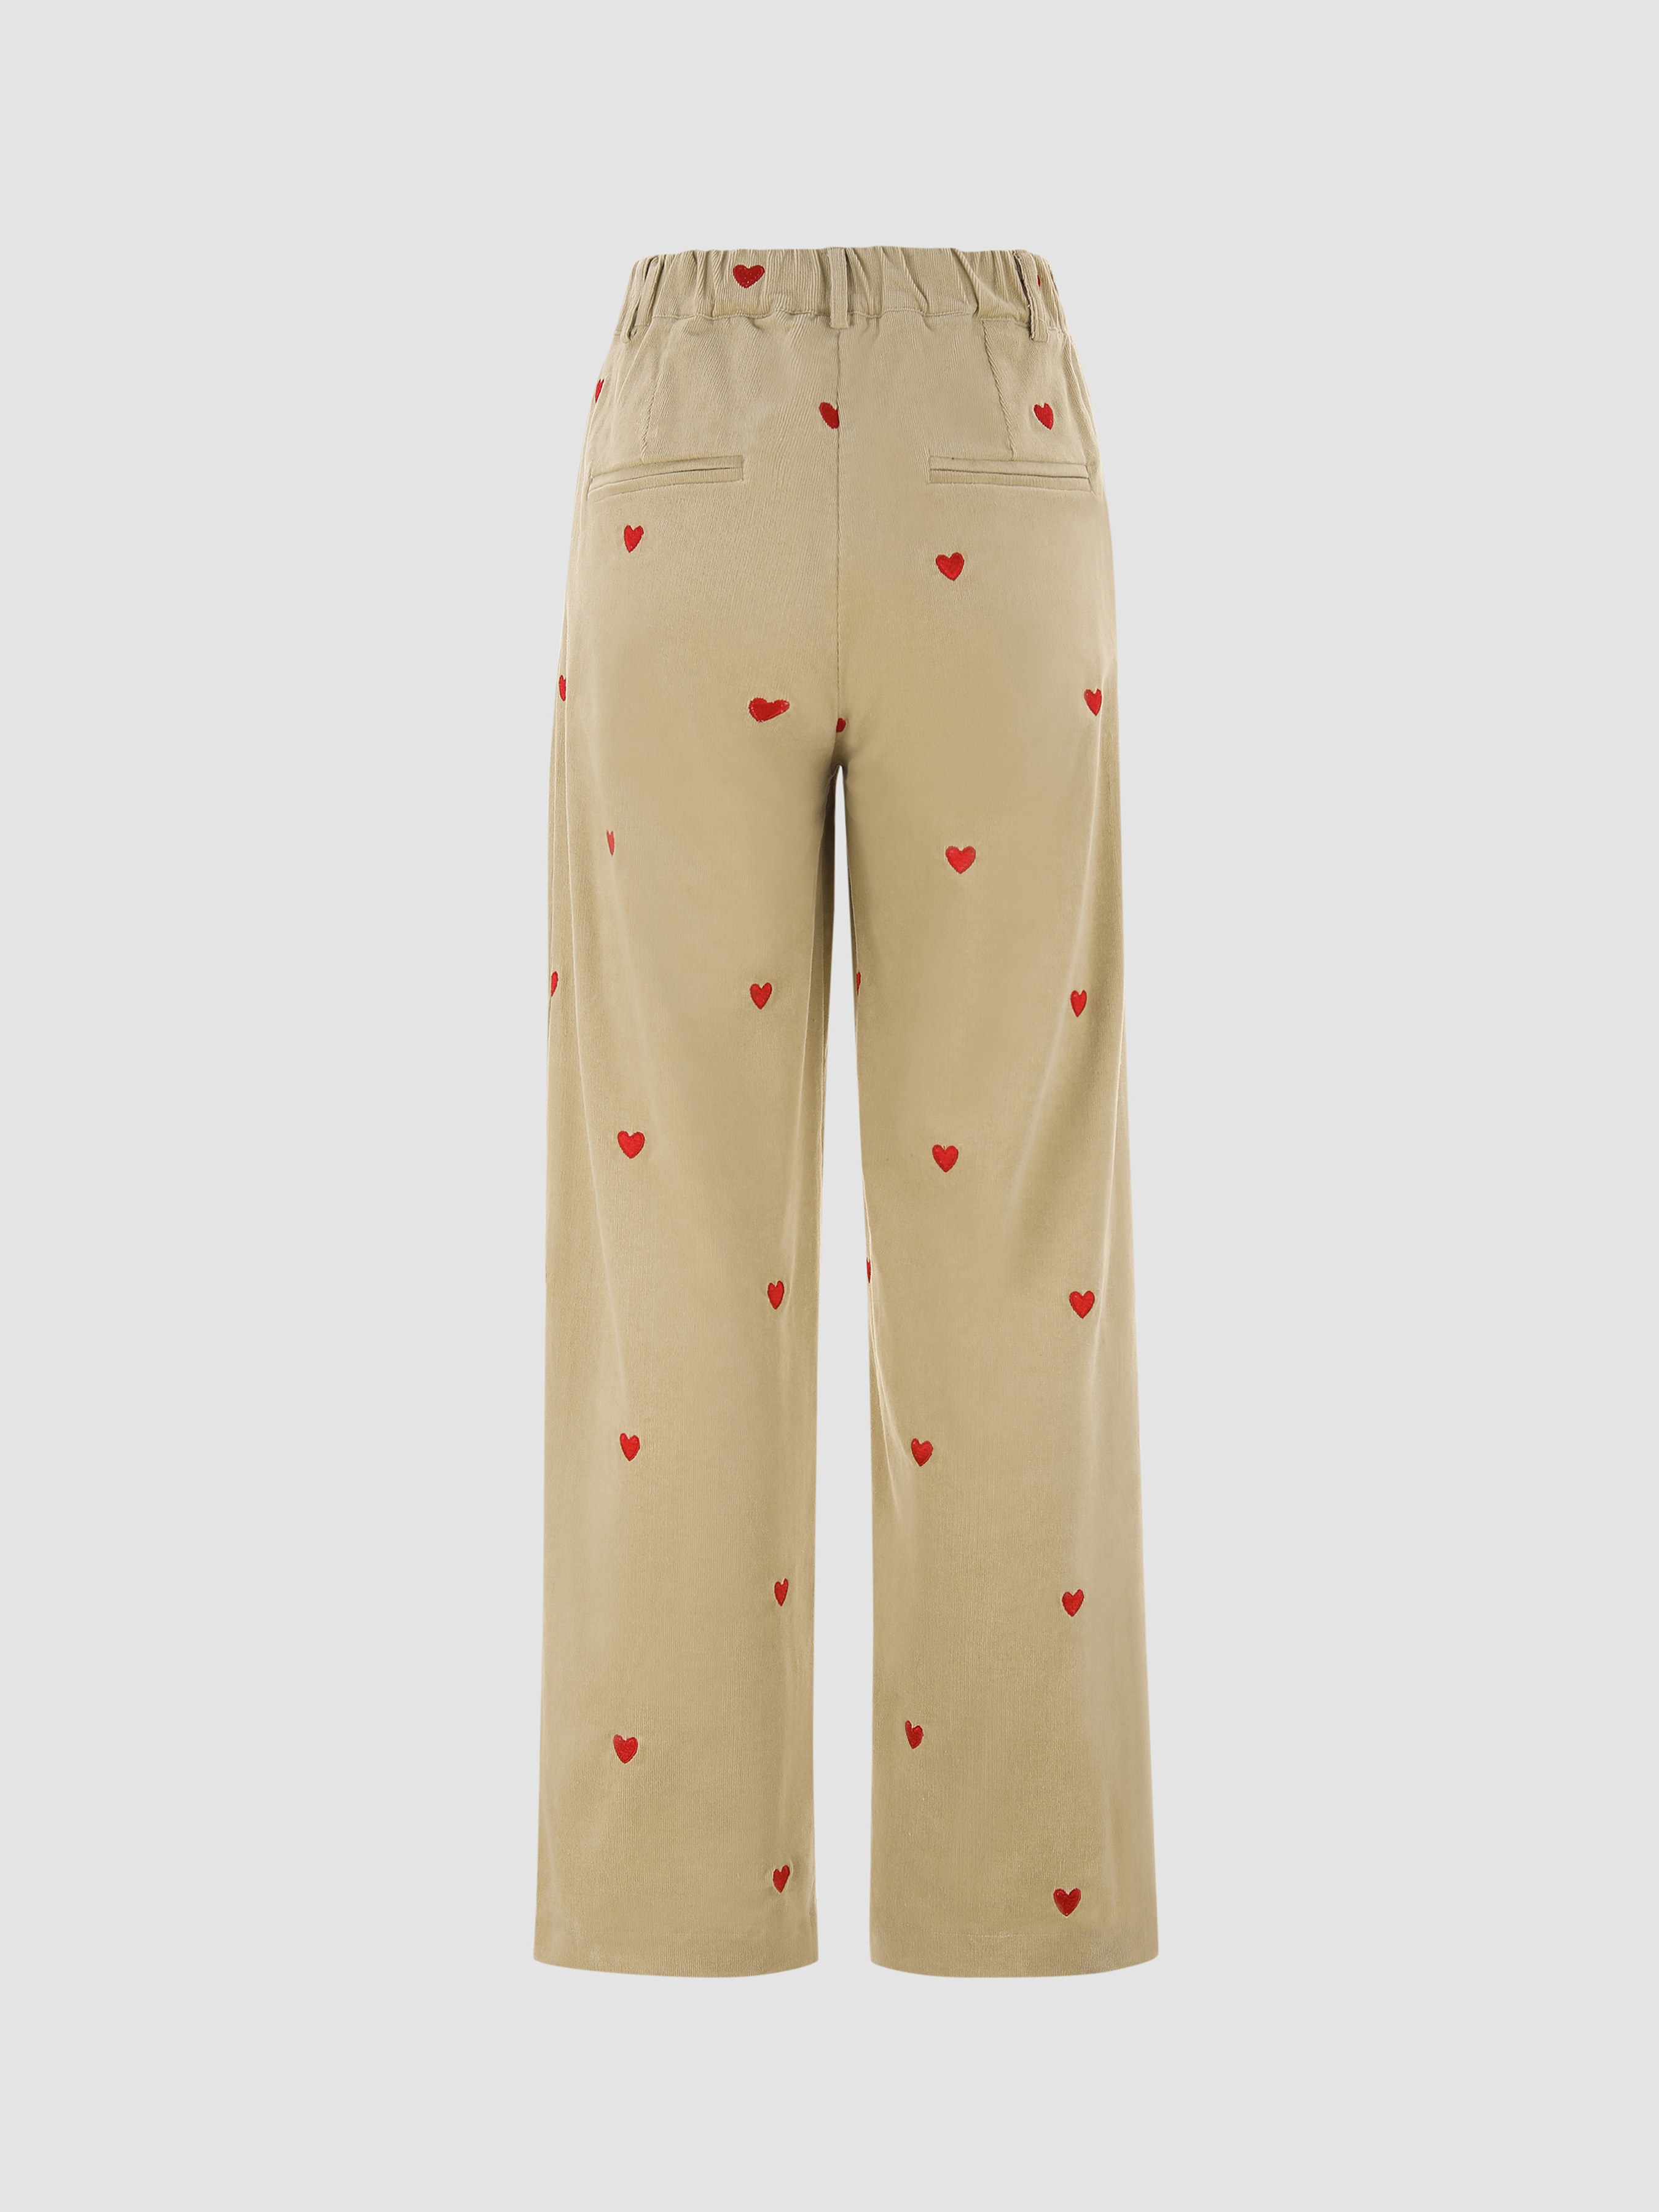 Uncontrollably In Love Corduroy Pants ...